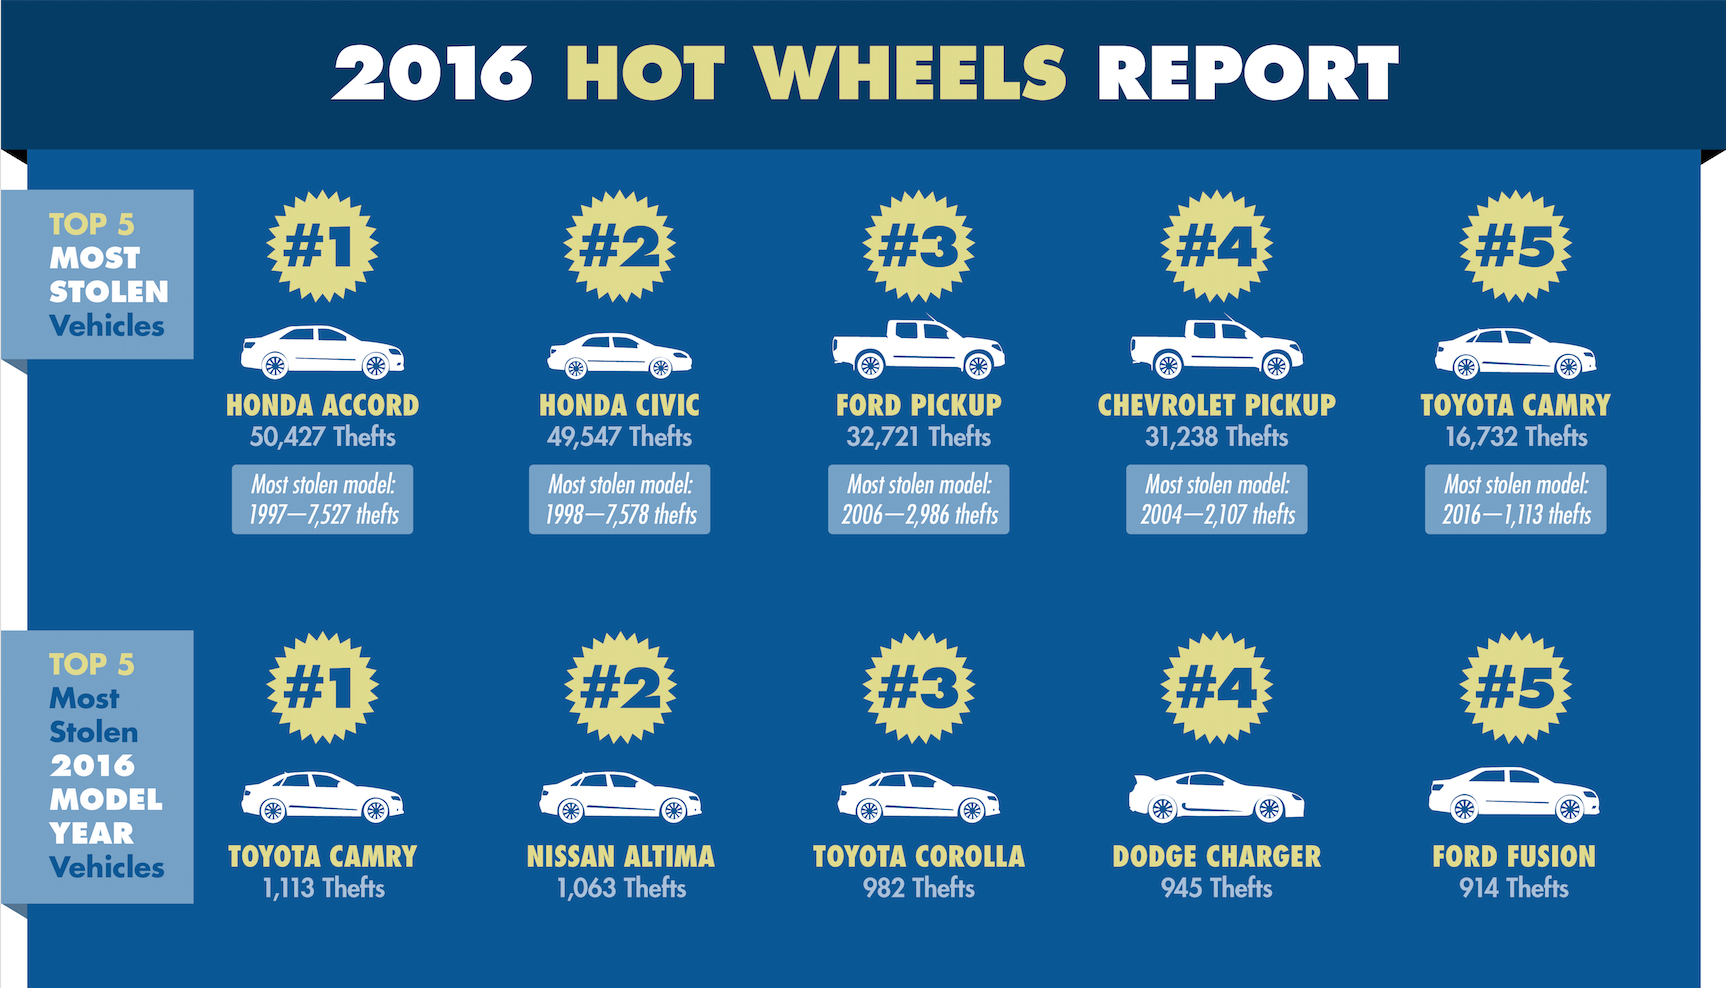 2016 Hot Wheels Infographic